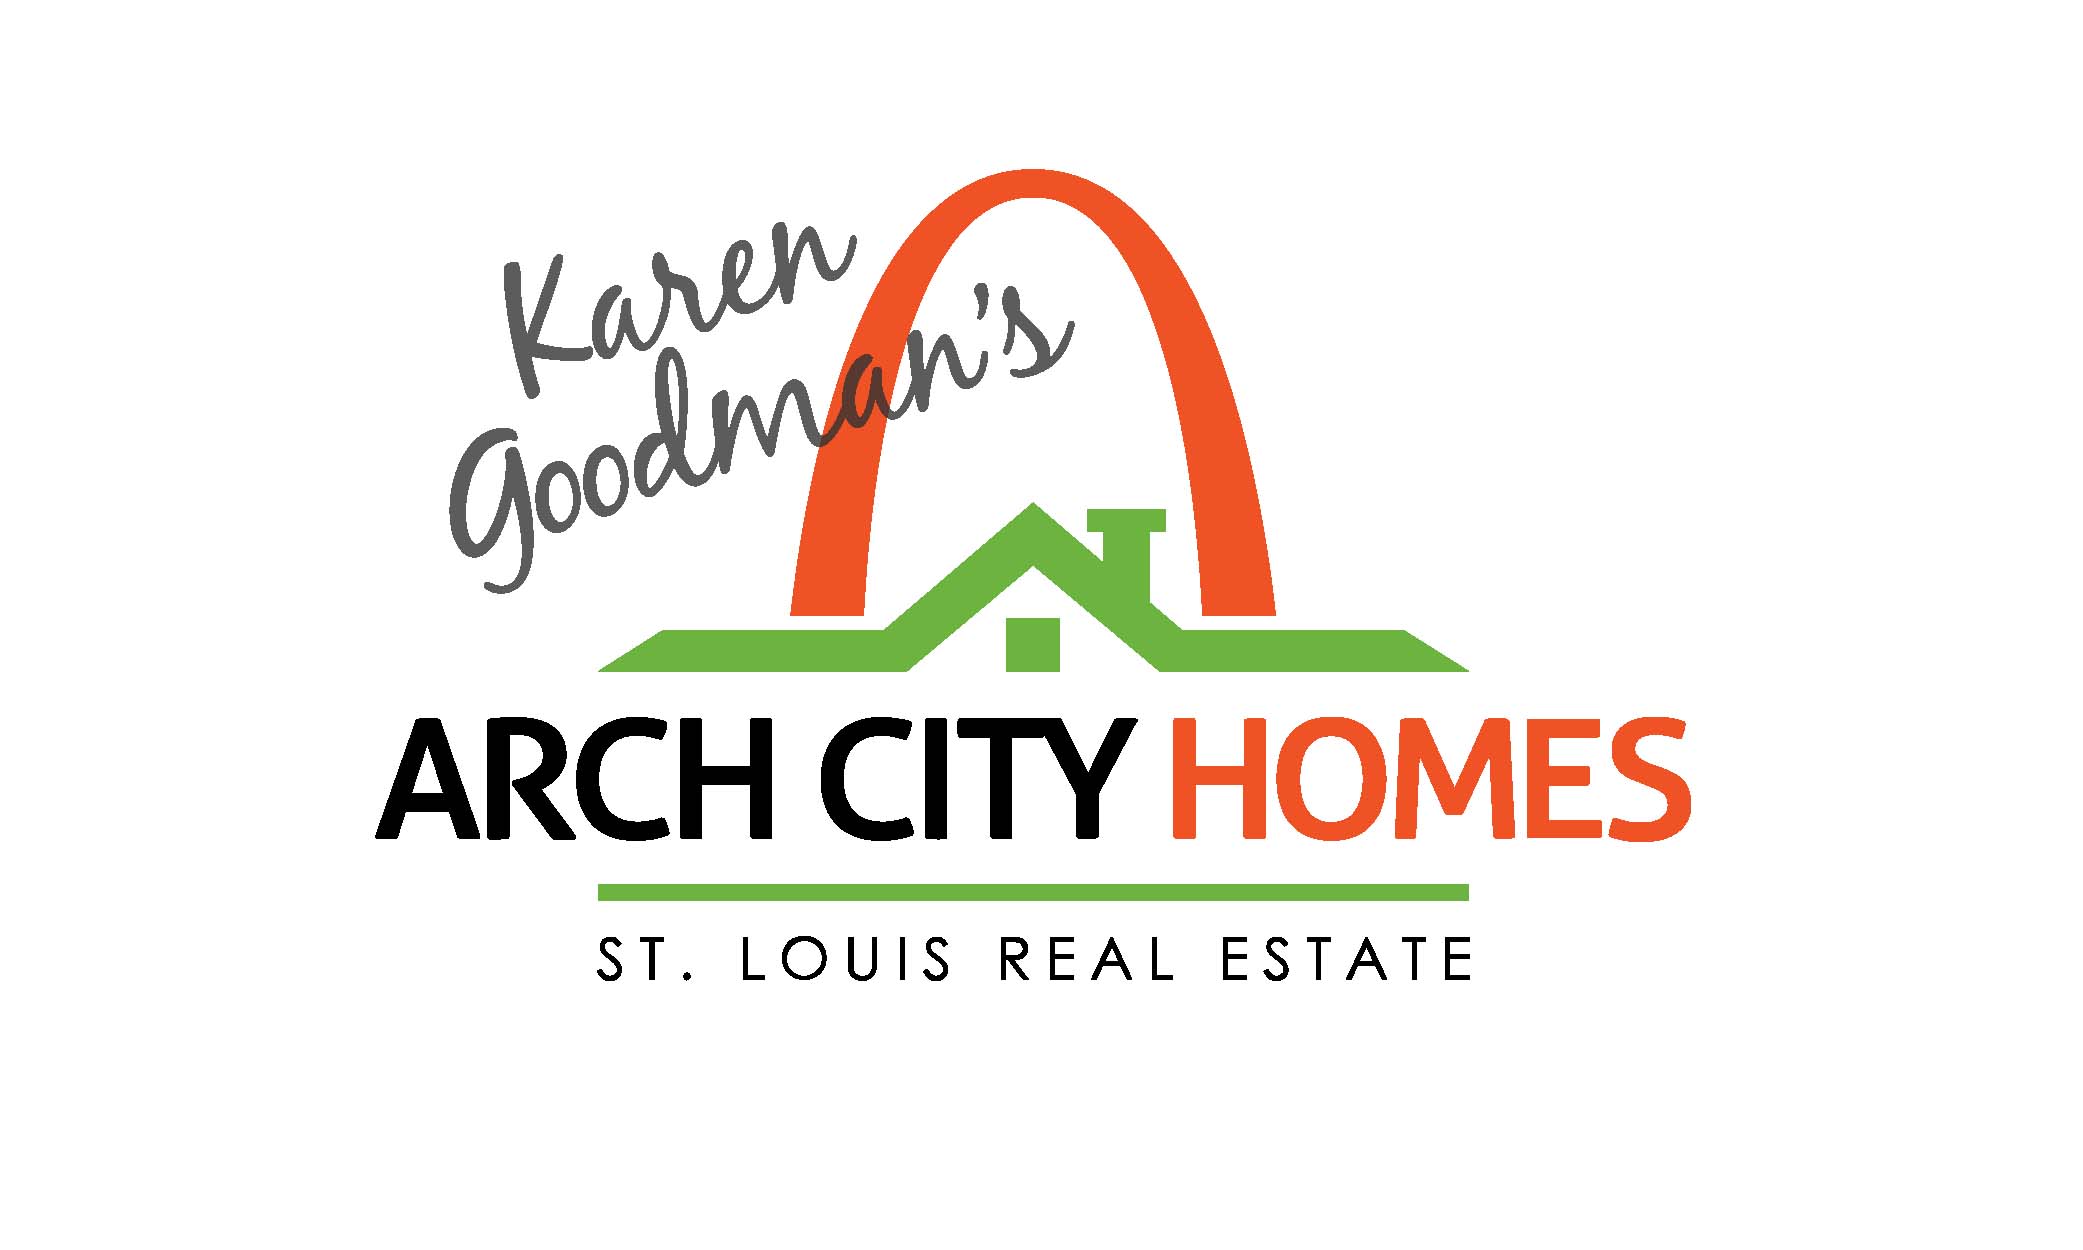 Search for St. Louis Homes at Arch City Homes